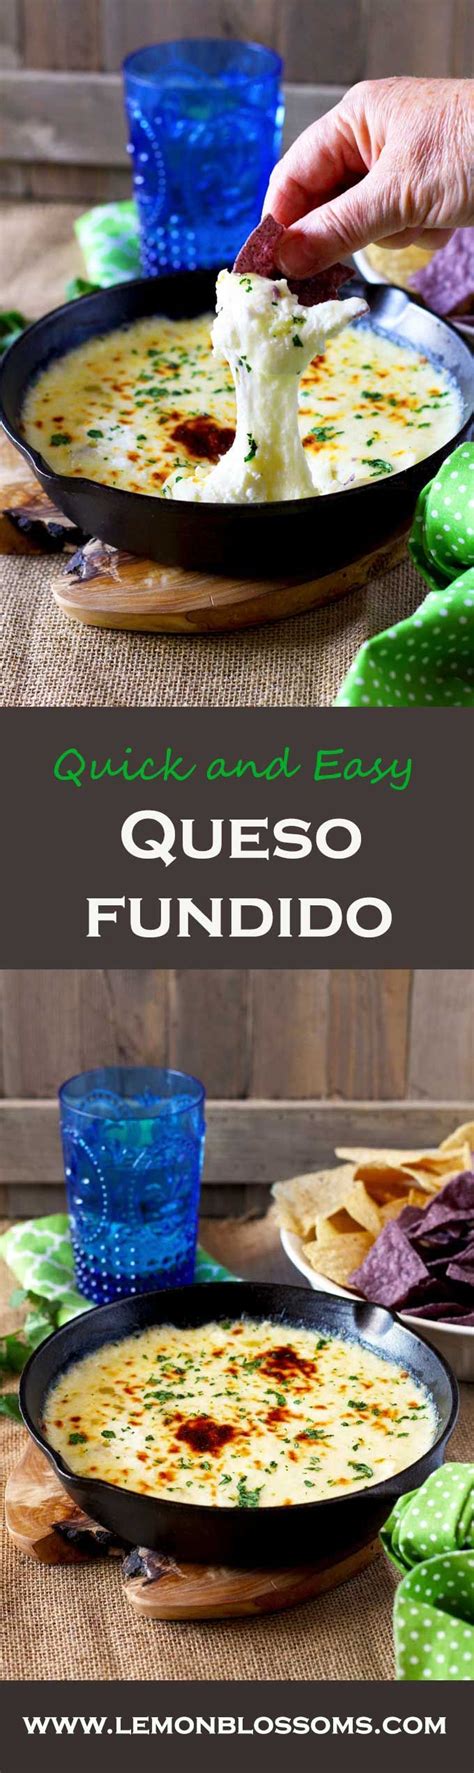 This Queso Fundido Dip Is Gooey Melty And Delicious Crumbled Goat